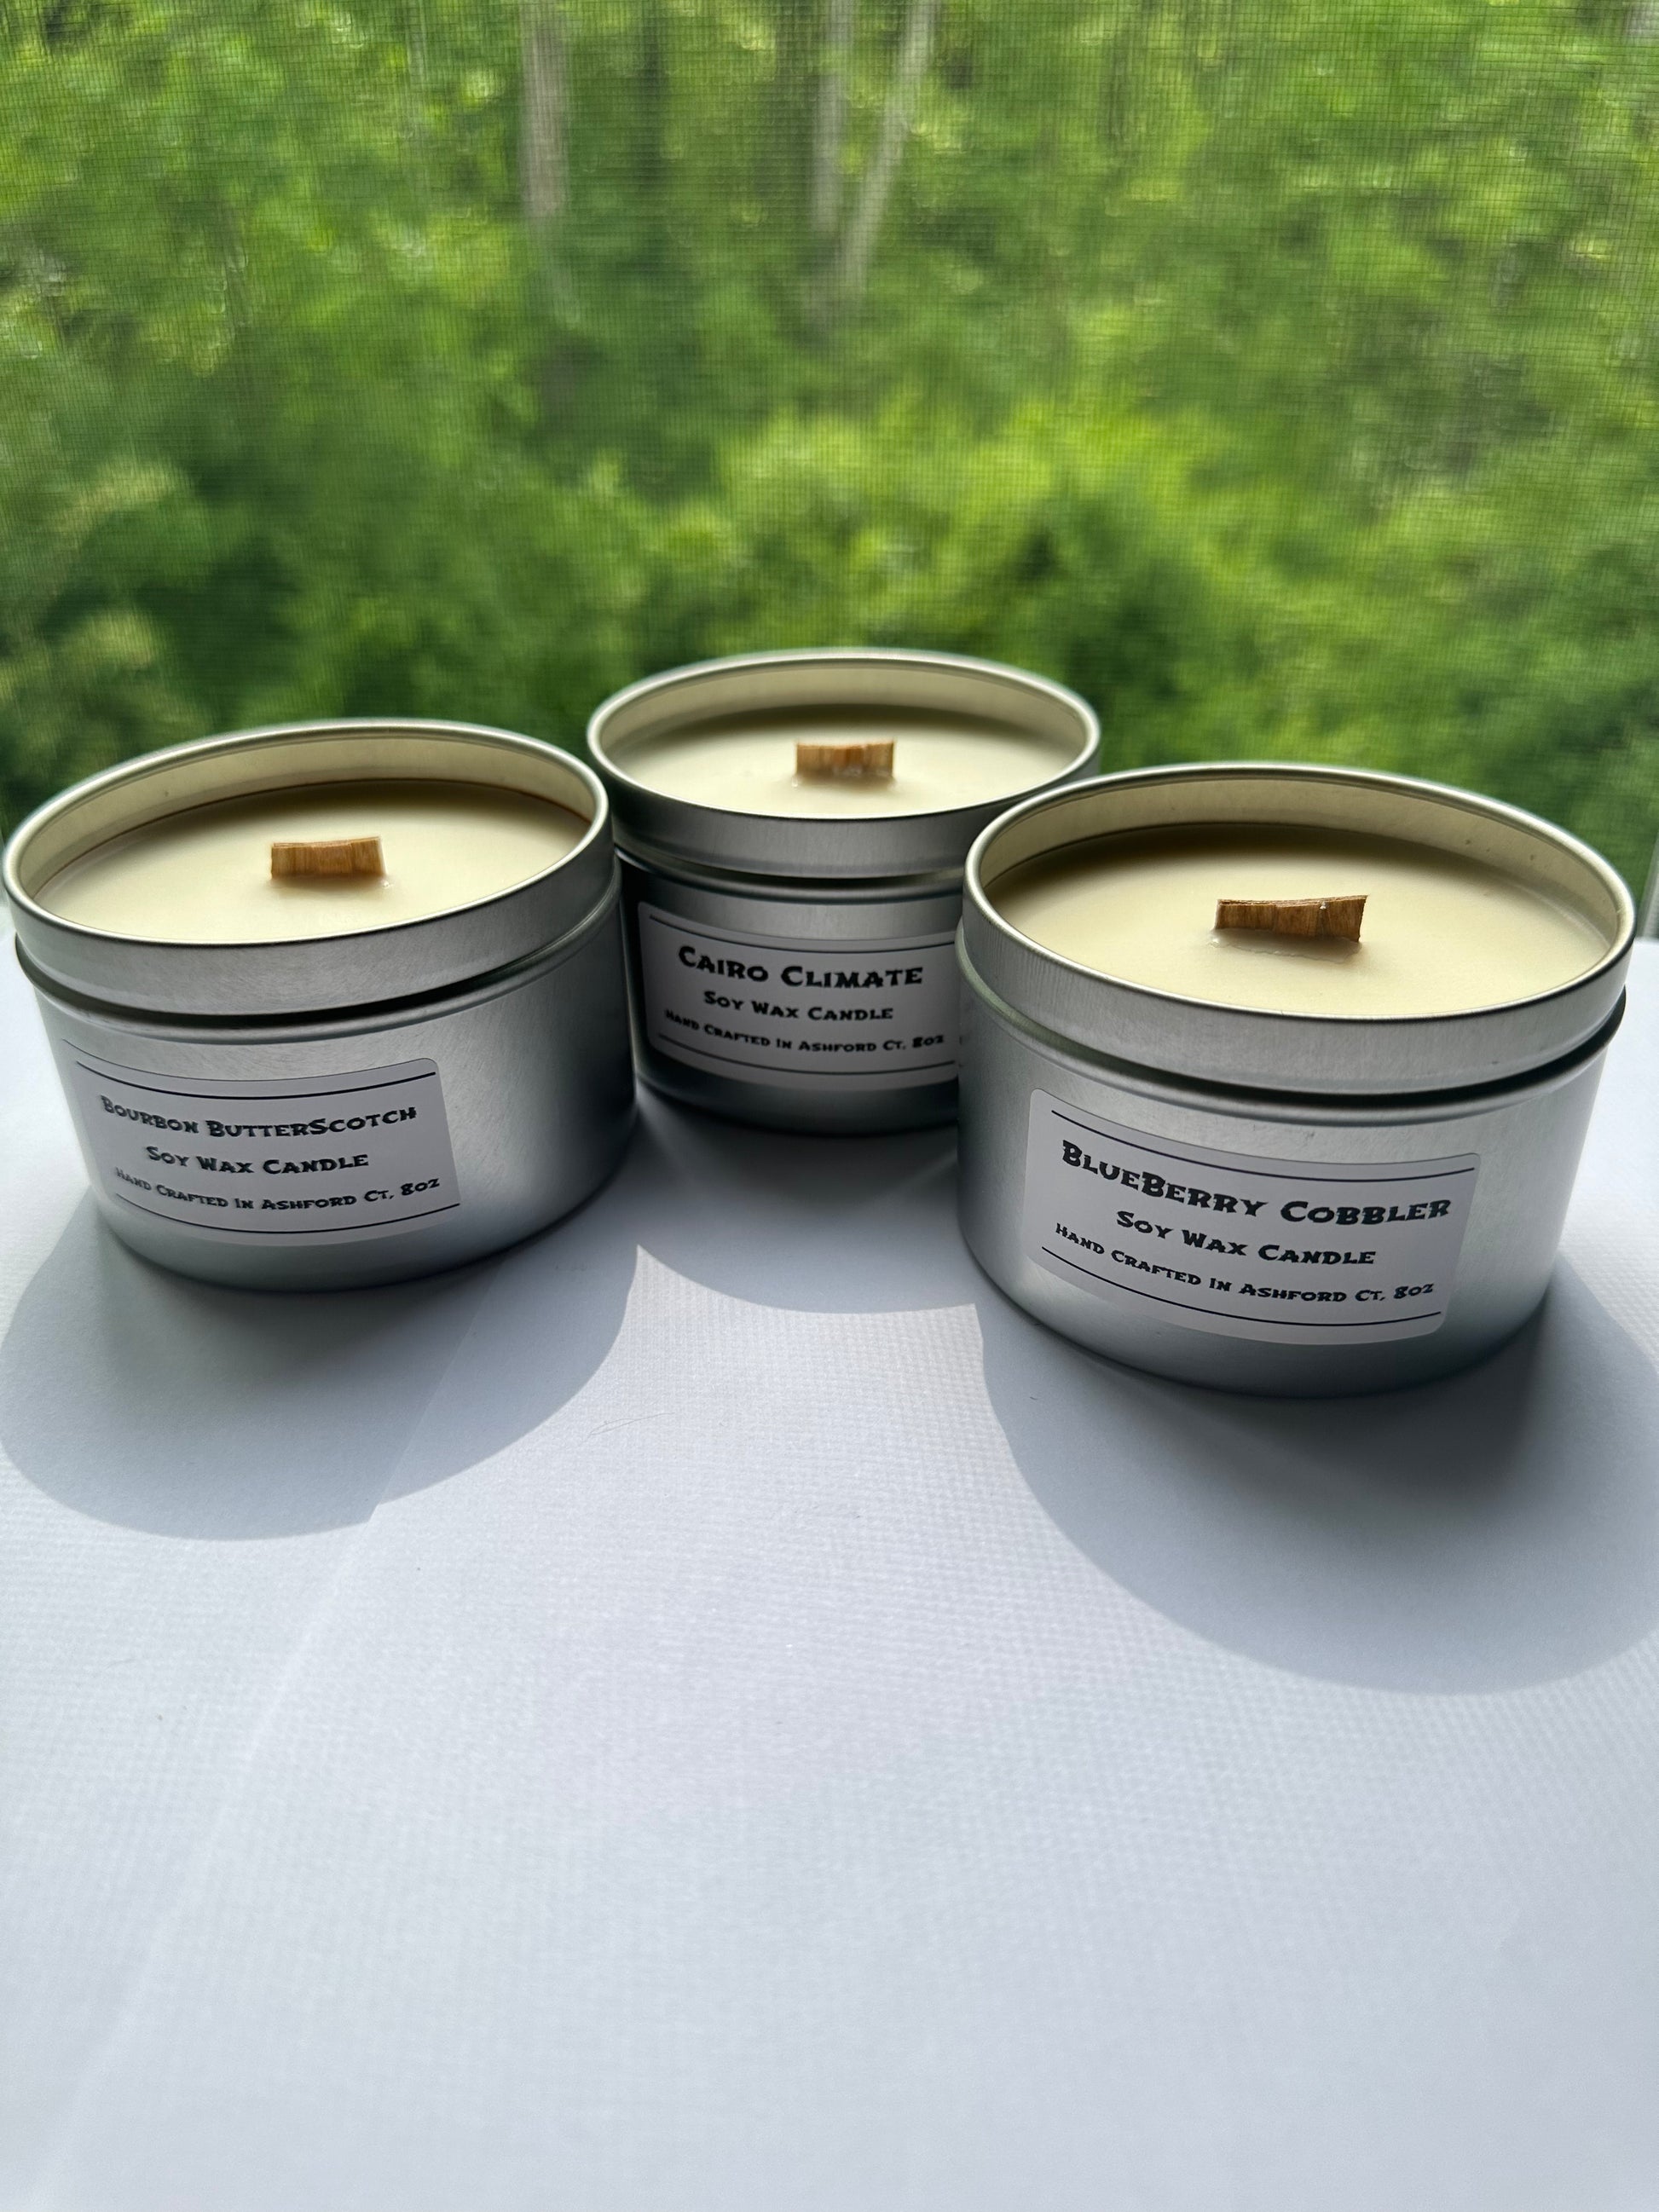 NJ Handpoured Wood Wick 8 oz. Candles (Multiple Scents)